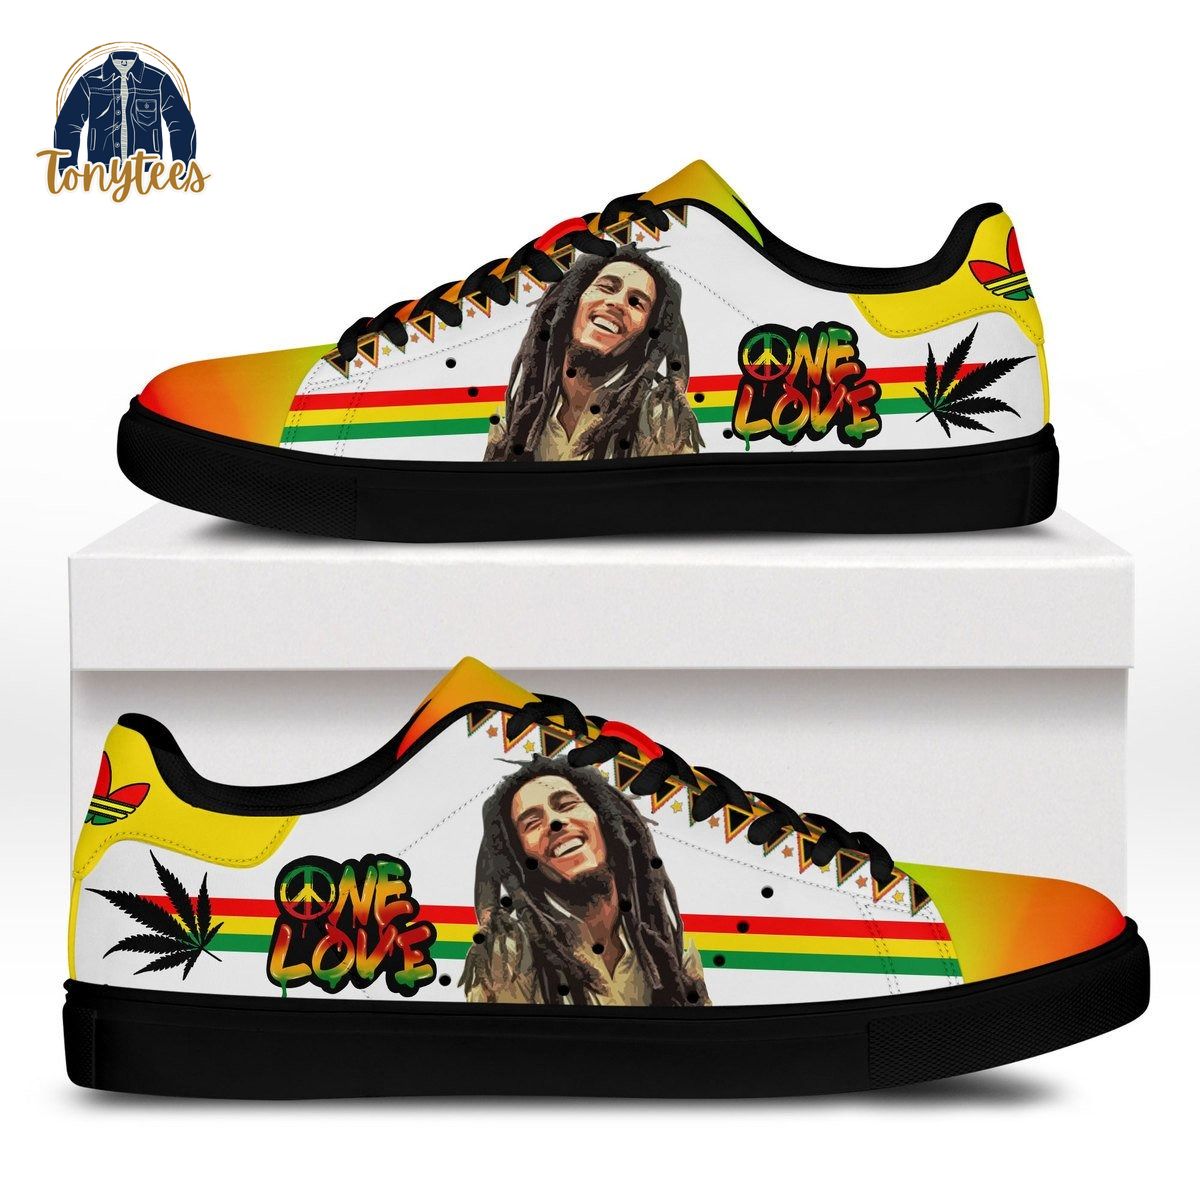 Bob marley one loves adidas stan smith shoes